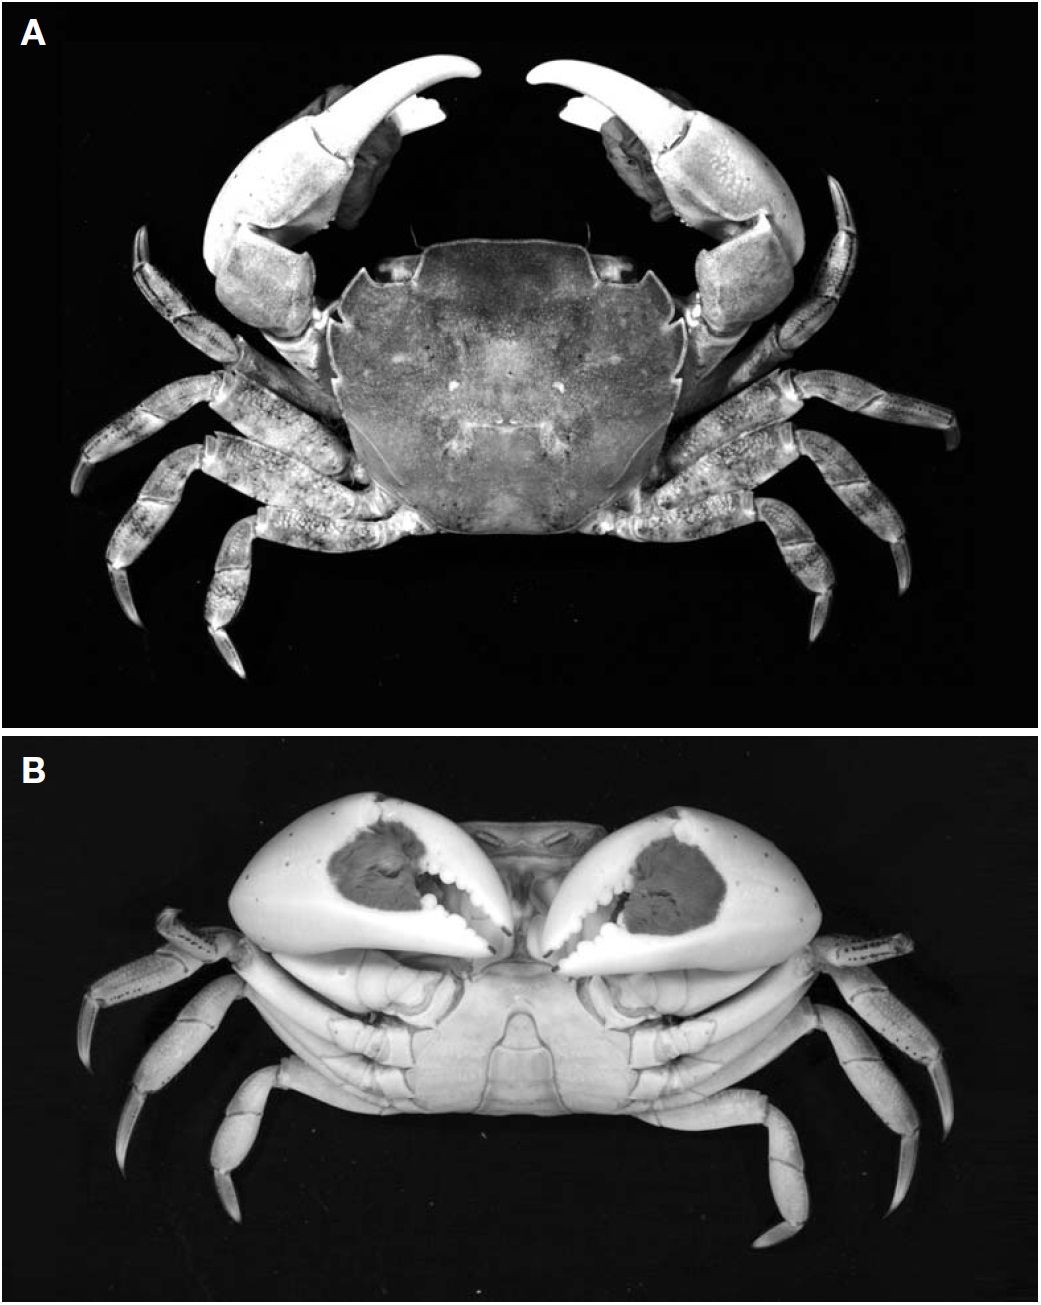 Hemigrapsus takanoi Asakura and Watanabe, 2005, male (CL 19.4 mm, CW 22.4 mm). A, Dorsal view; B, Ventral view. CL, carapace length from the front to the posterior dorsal margin of the carapace; CW, width of the carapace measured at the widest part.